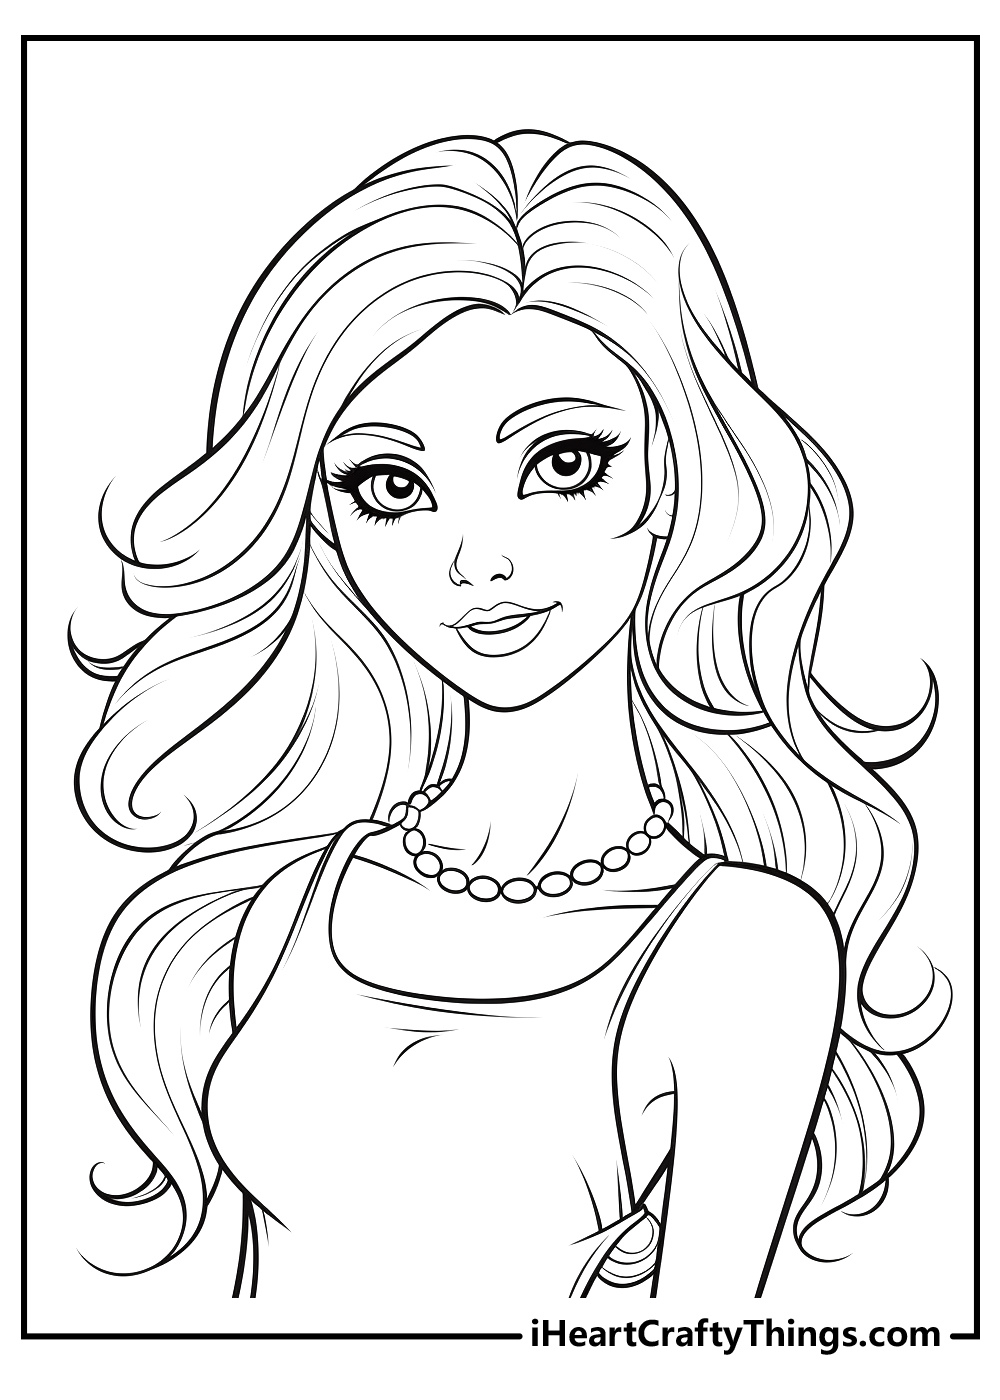 Snow White deluxe gown lineart | Barbie coloring pages, Coloring book art,  Coloring pages